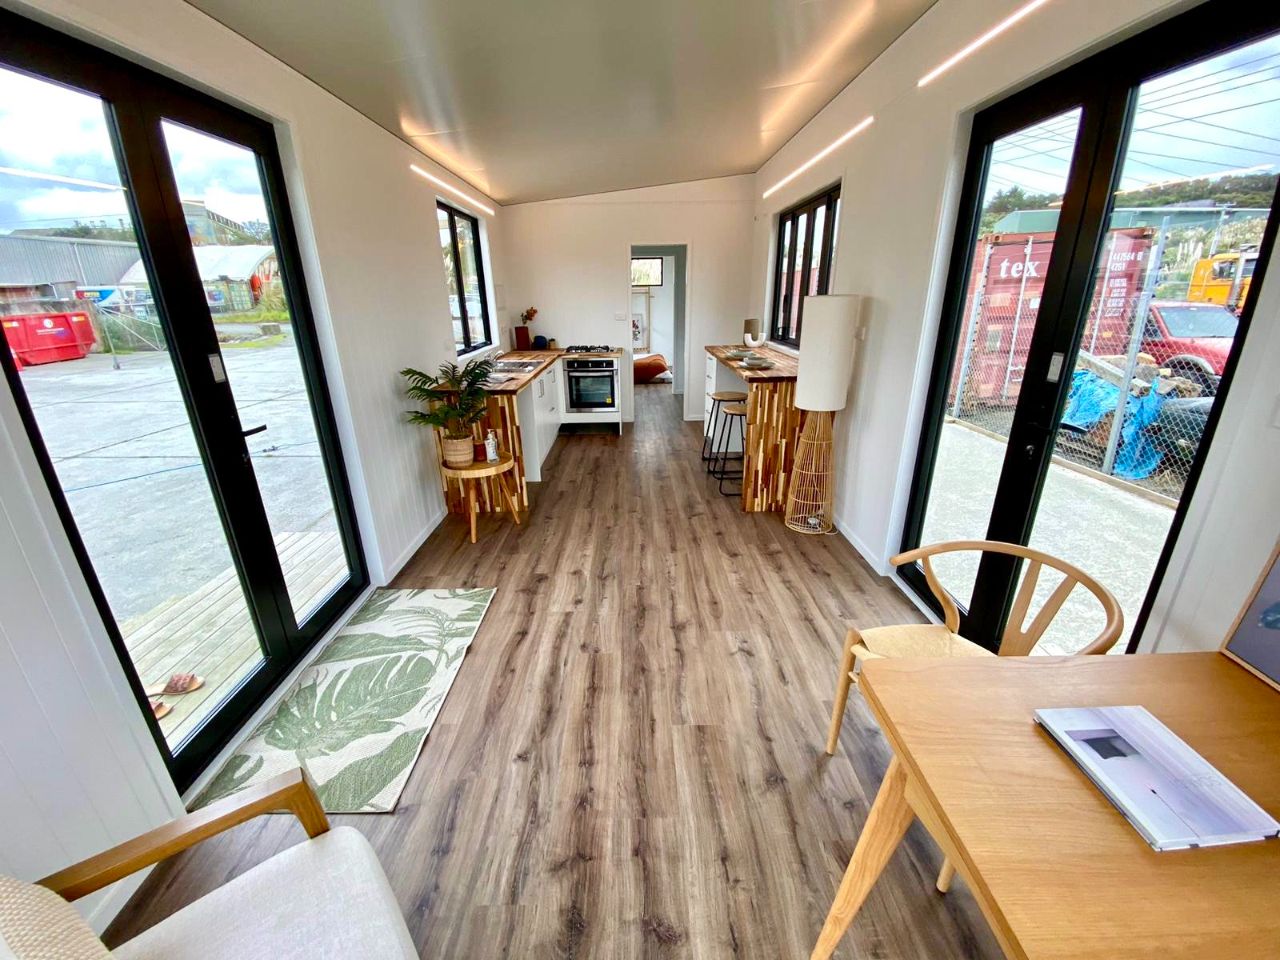 The Little Ruru: A Spacious Tiny Home with Accessibility at Its Heart